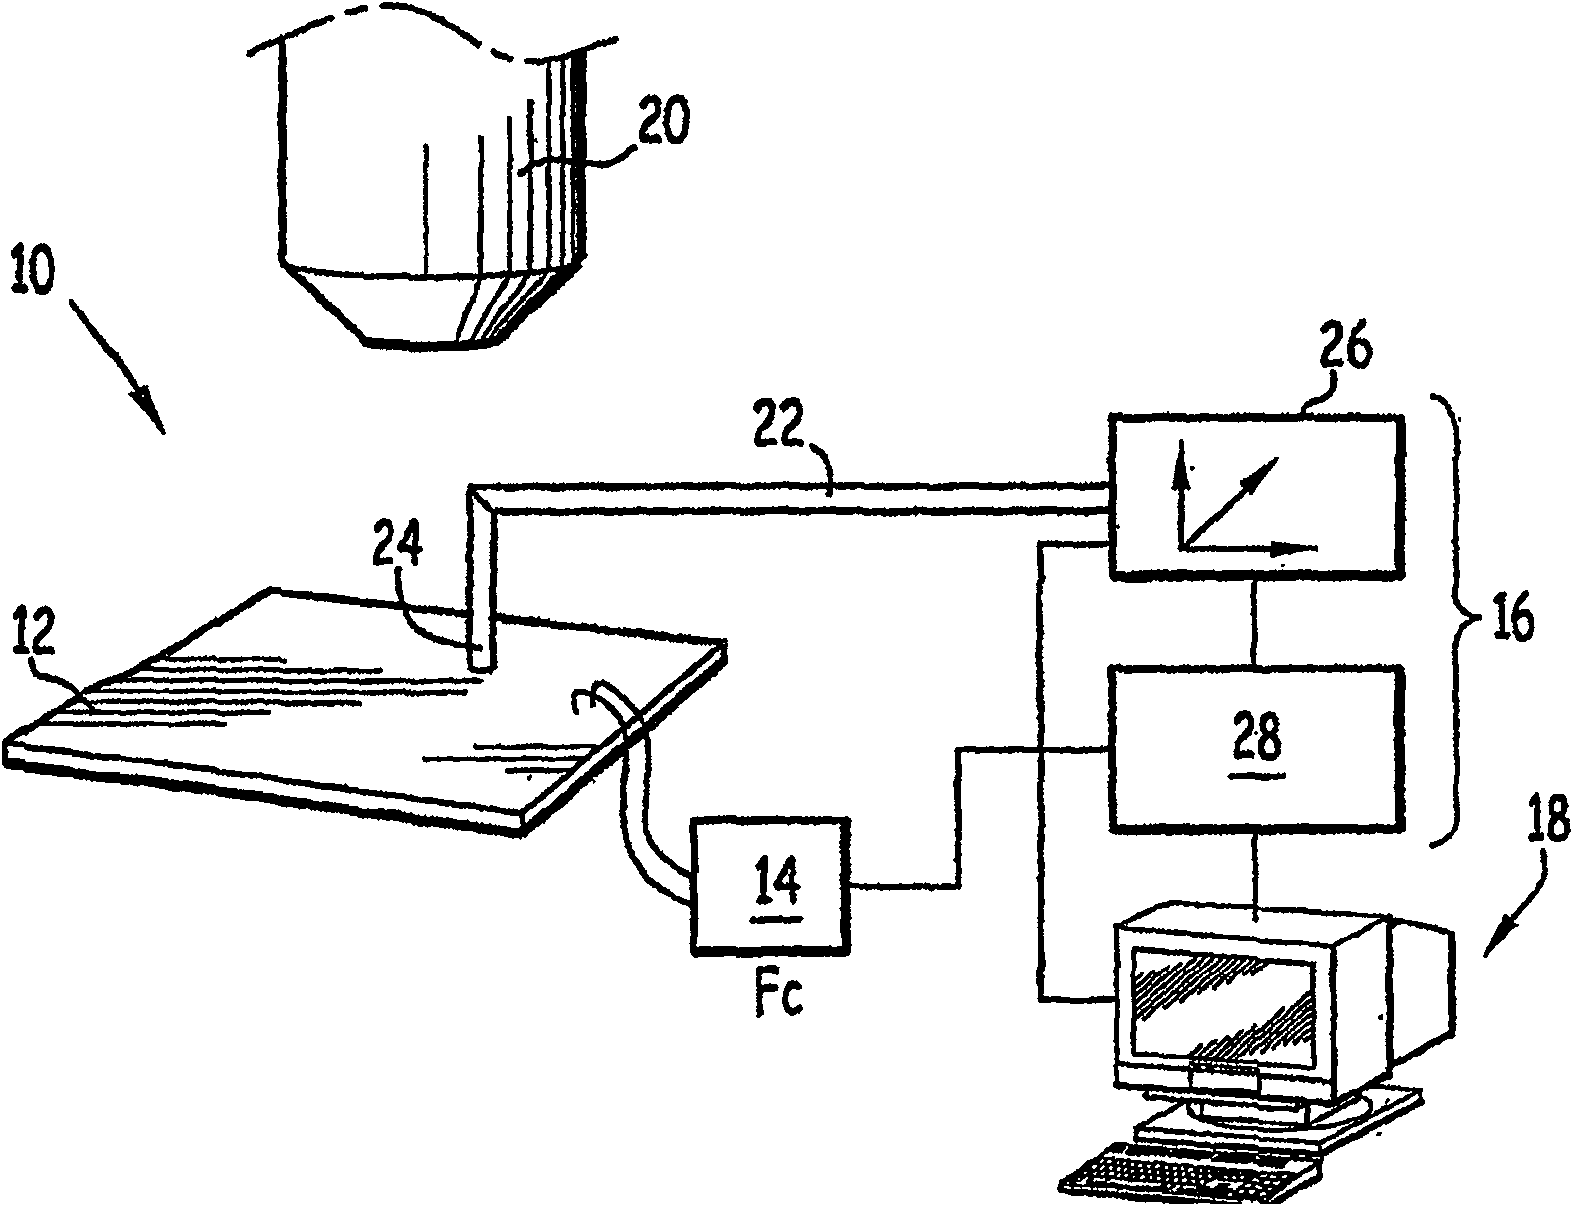 Magnetic-field-measuring device